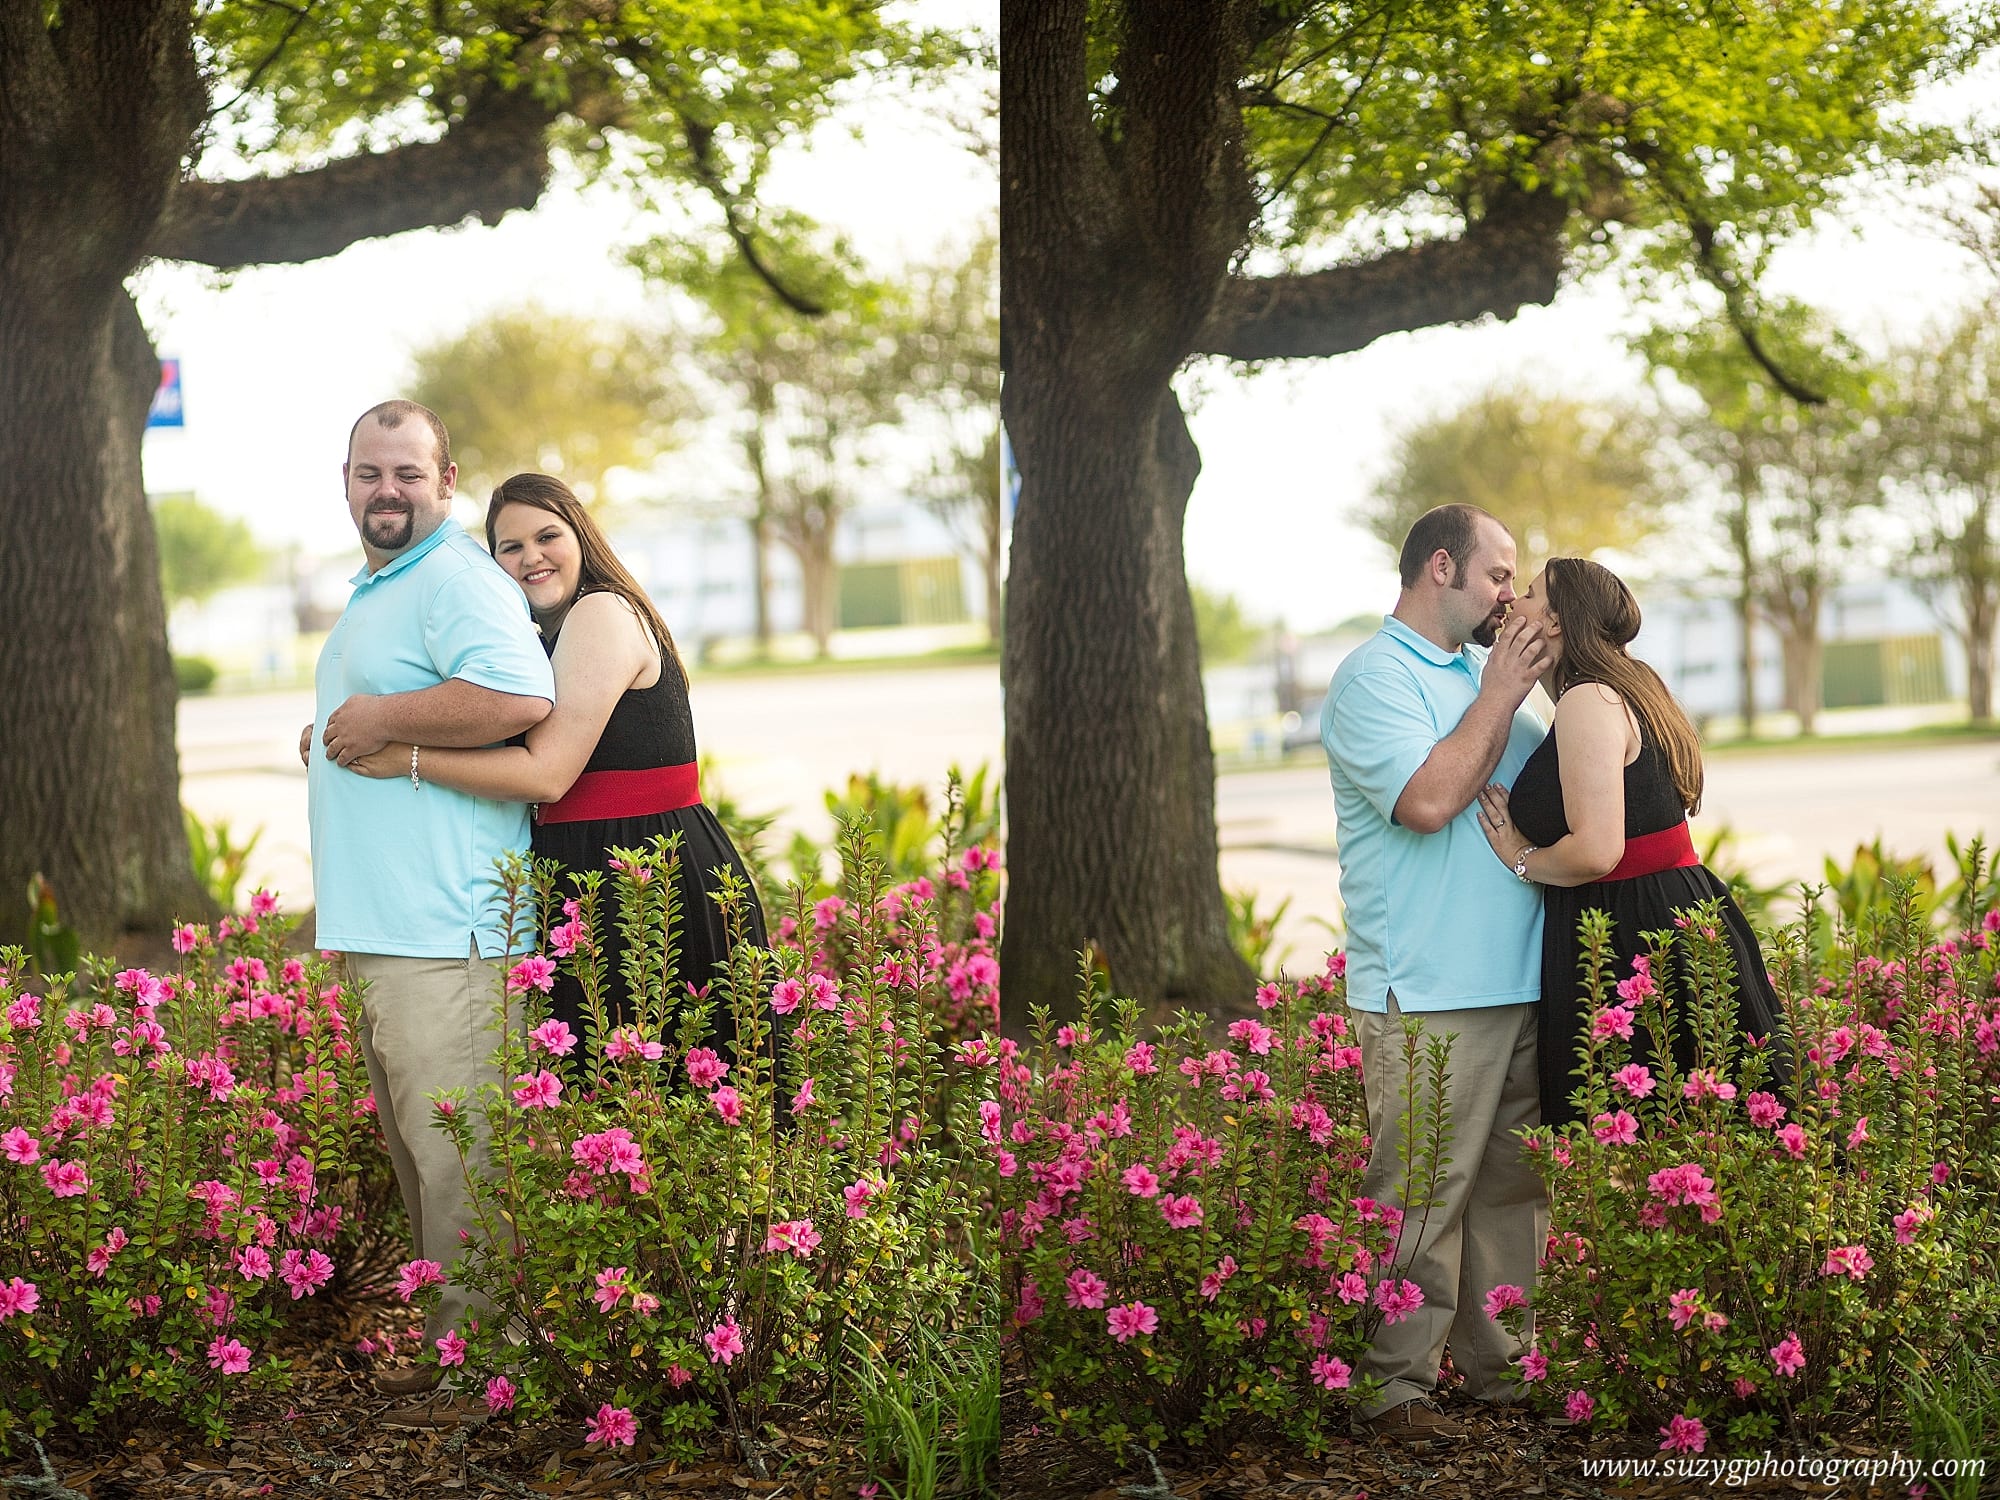 engagements-new orleans-texas-baton rouge-lake charles-suzy g-photography-suzygphotography_0031